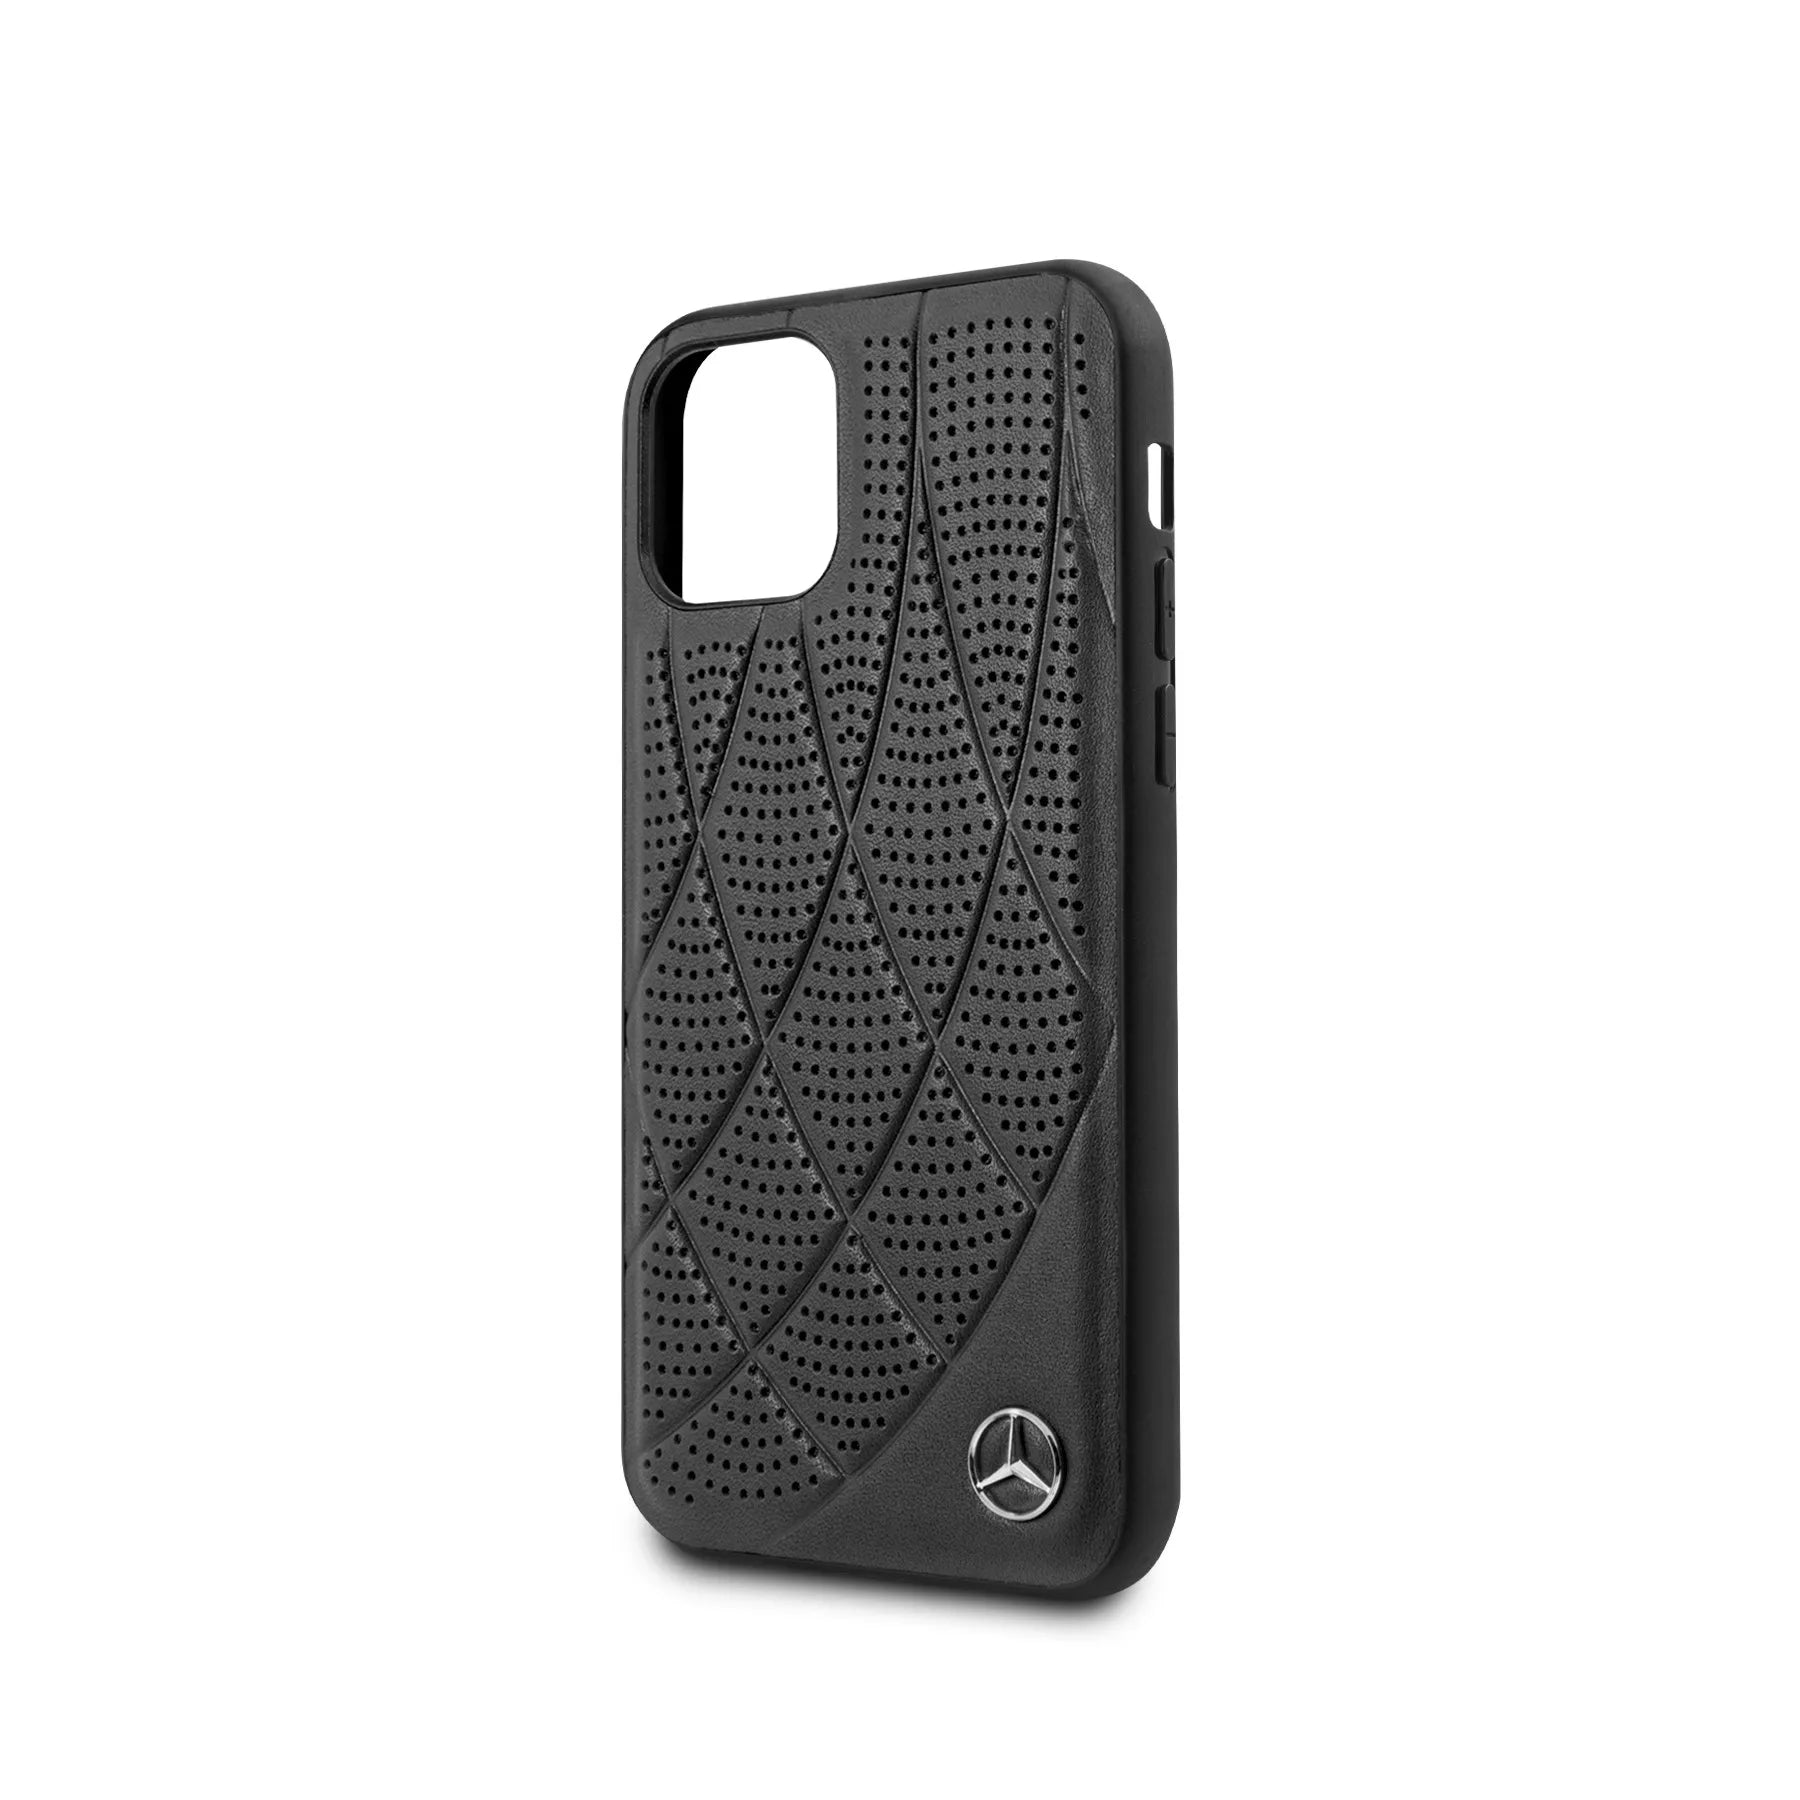 Coque Mercedes pour iPhone 11 Pro - My Store